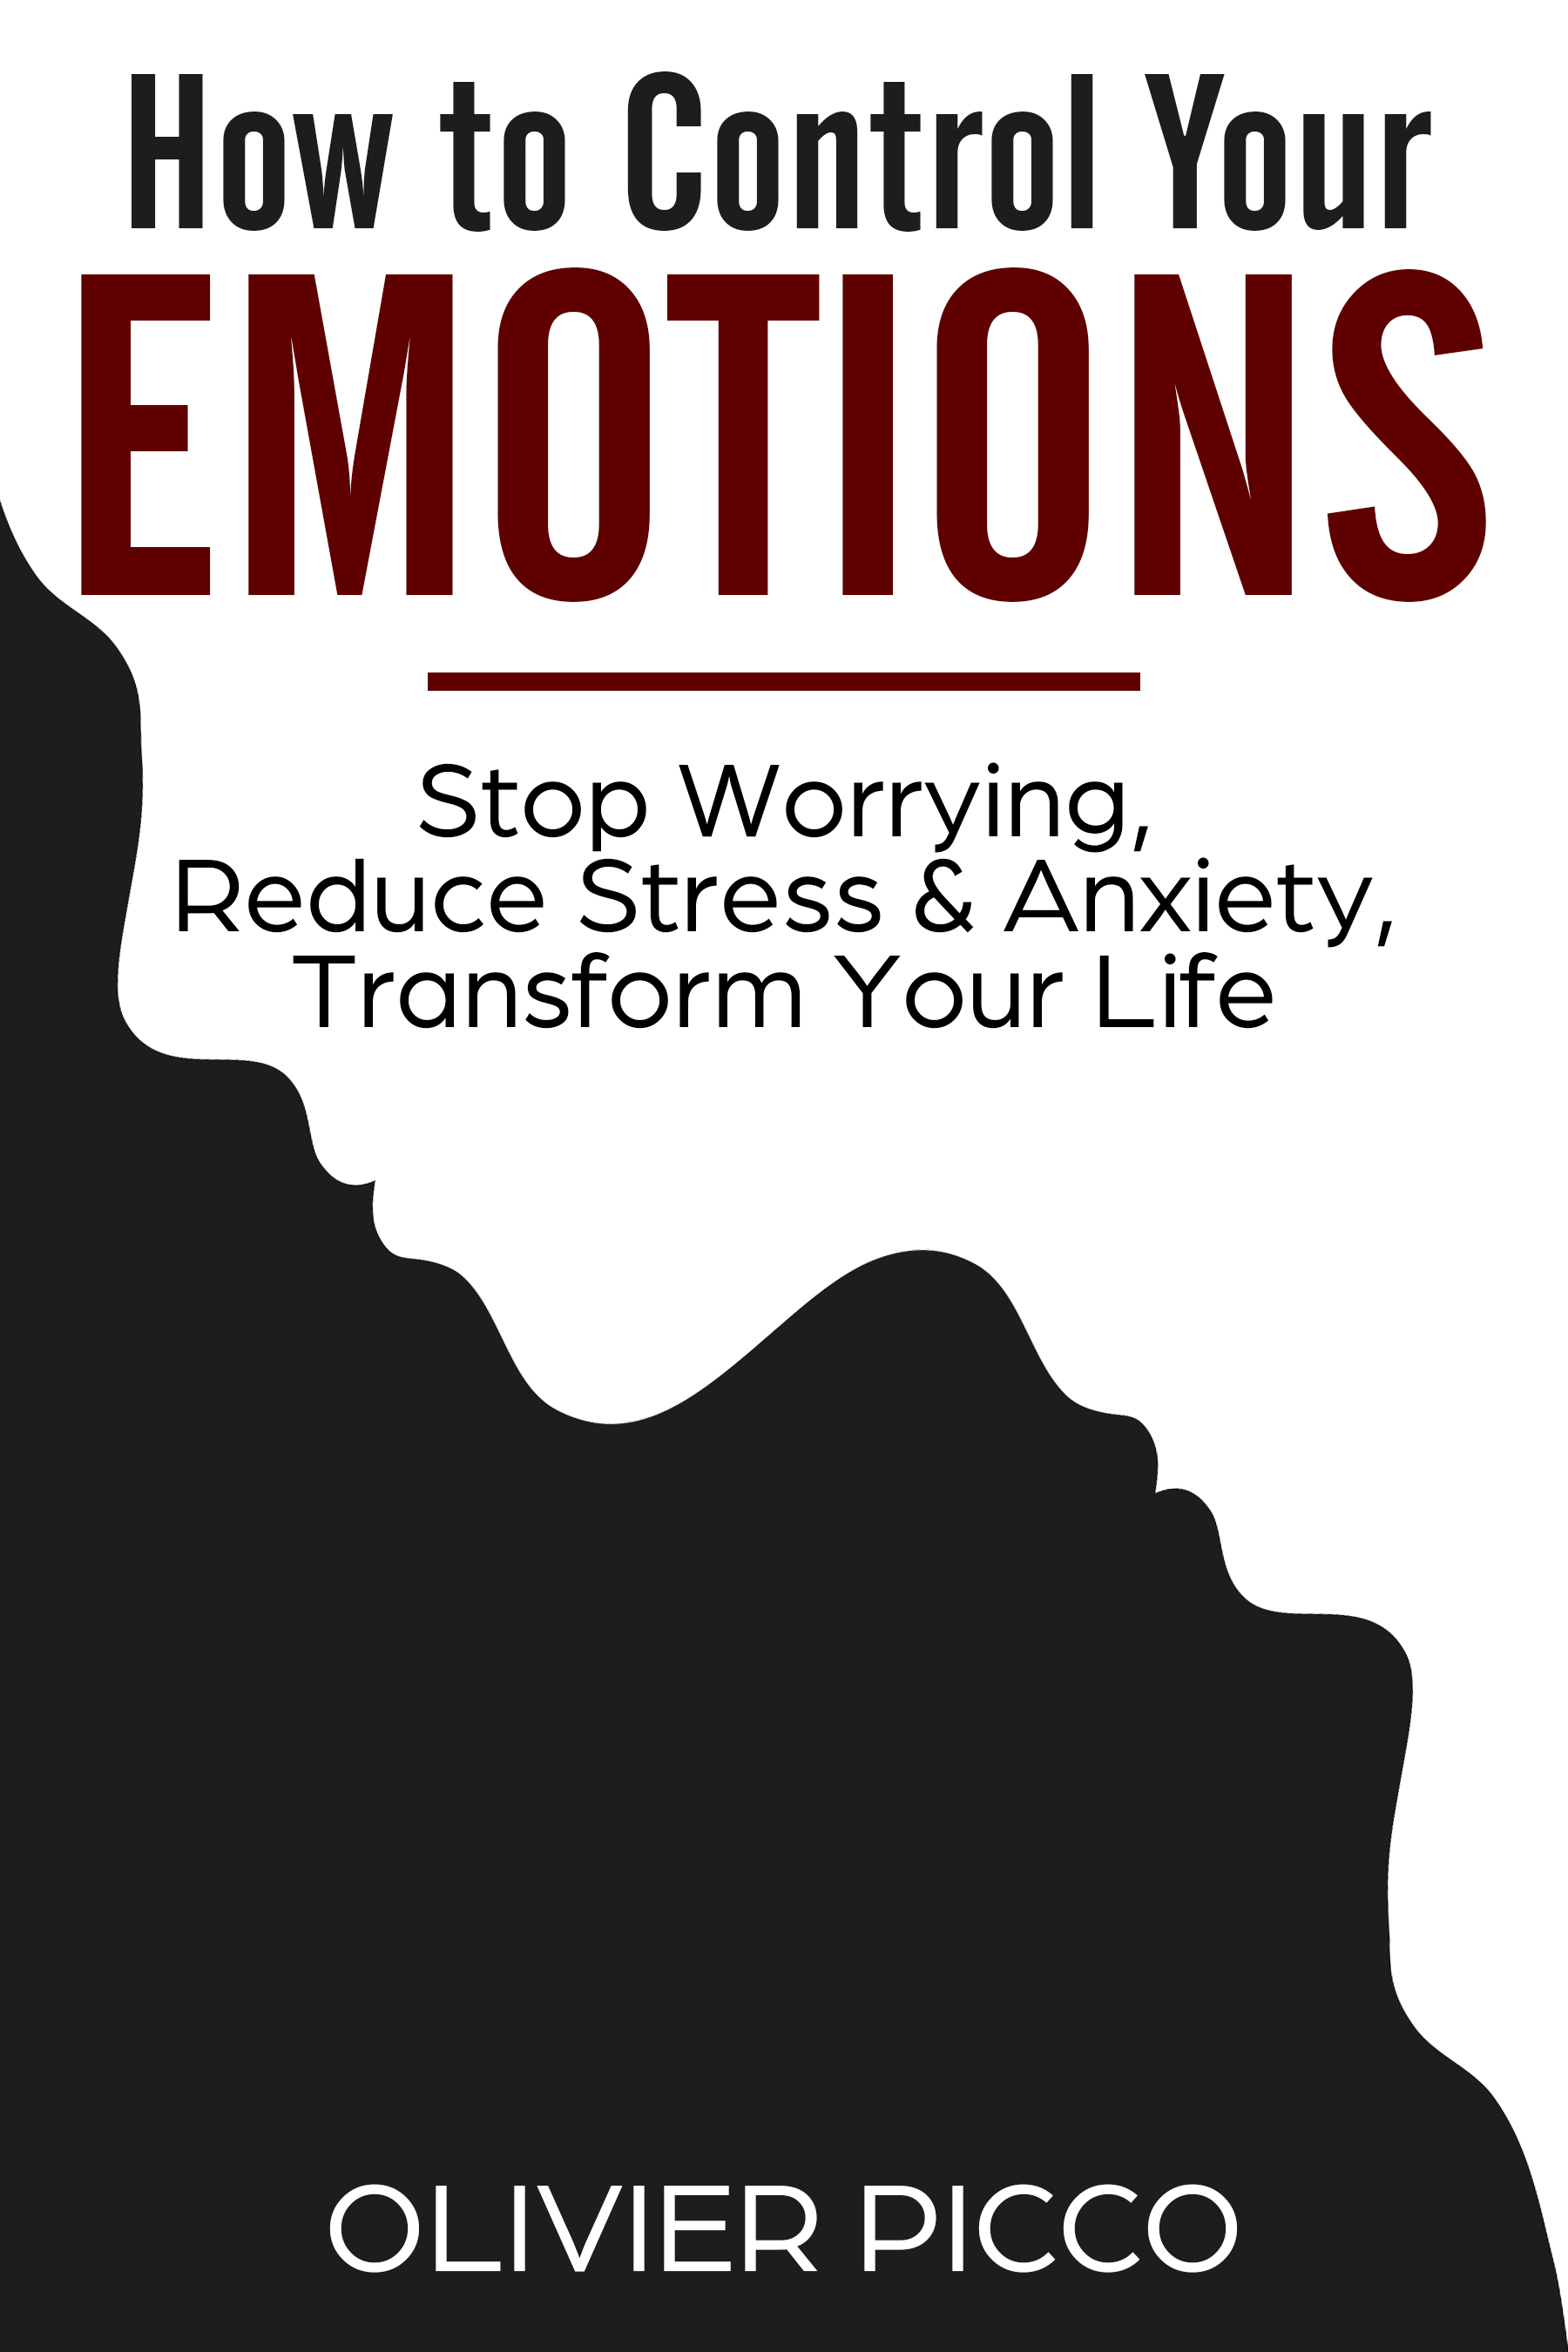 FREE: How to Control Your Emotions: Stop Worrying, Reduce Stress & Anxiety. Transform Your Life by Olivier Picco